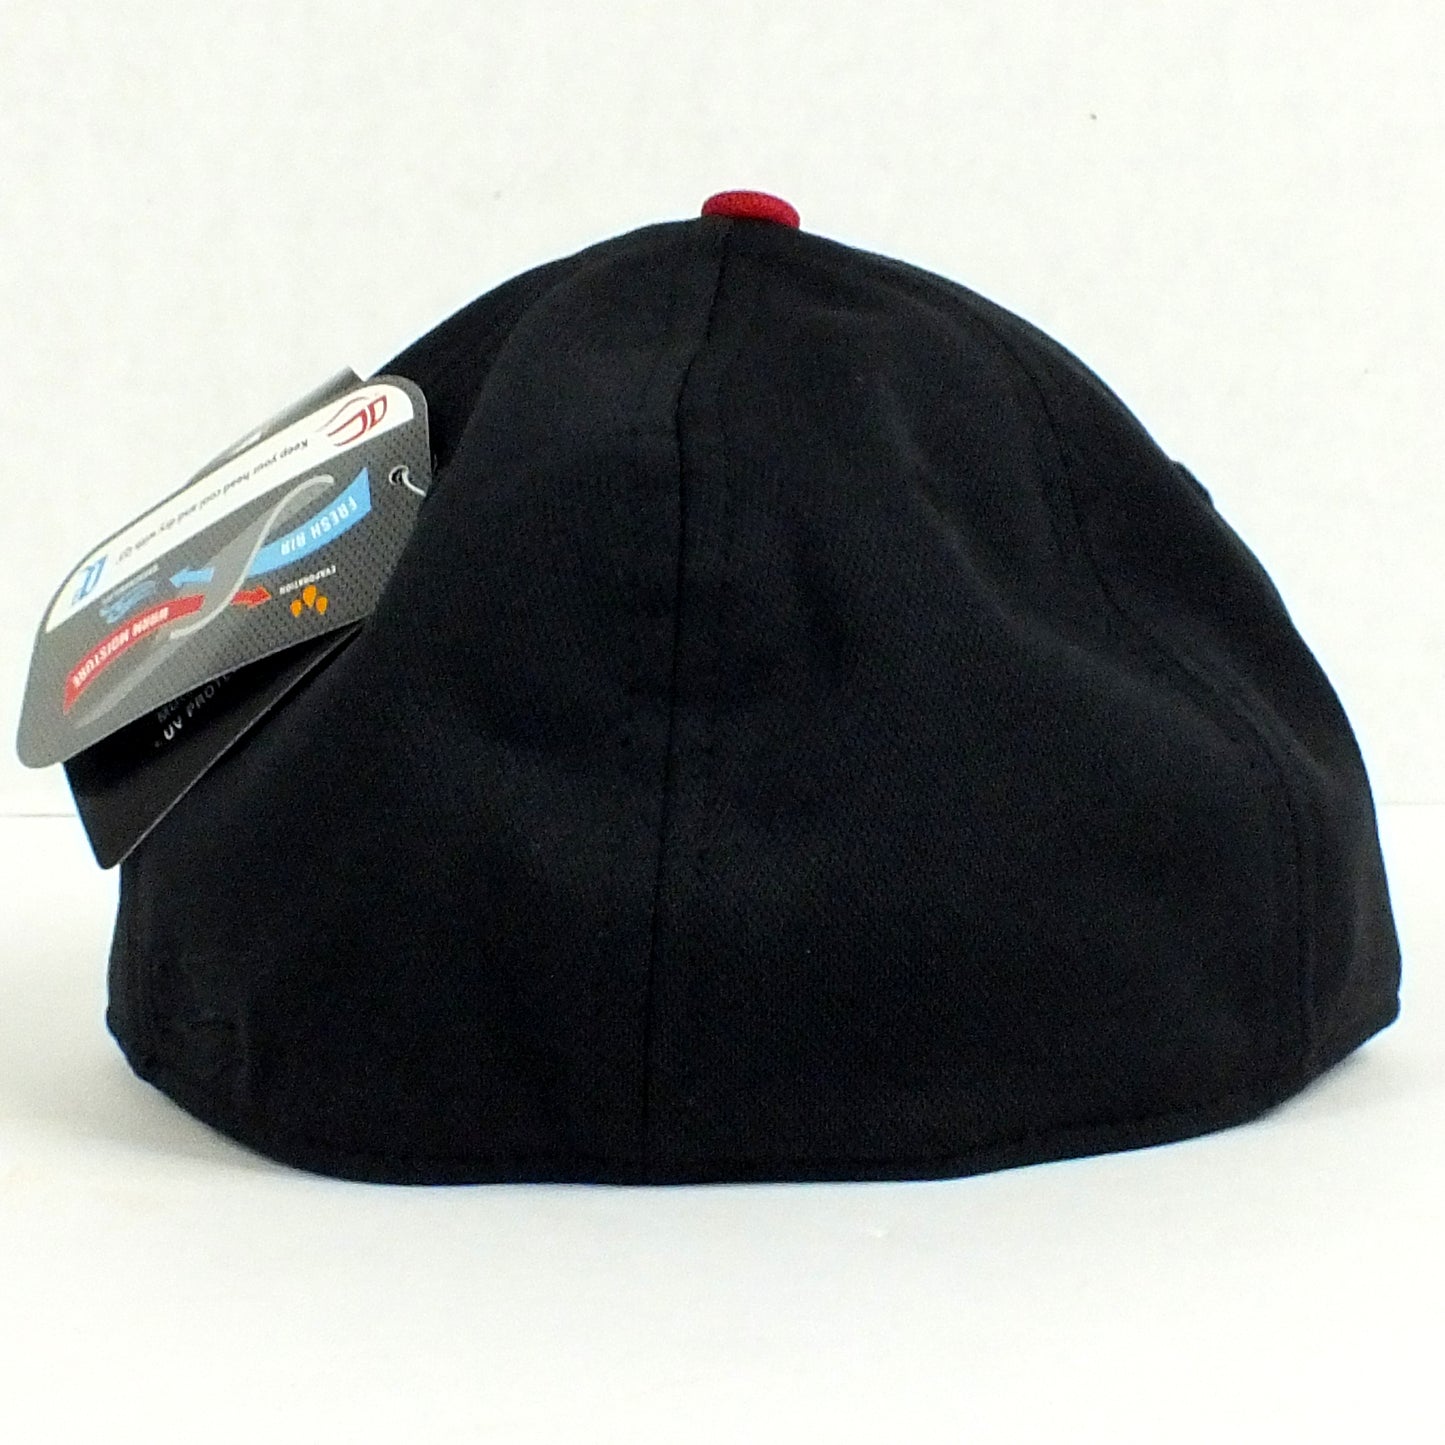 Washington DC Flag Black and Red Fitted Flat Brim Hat